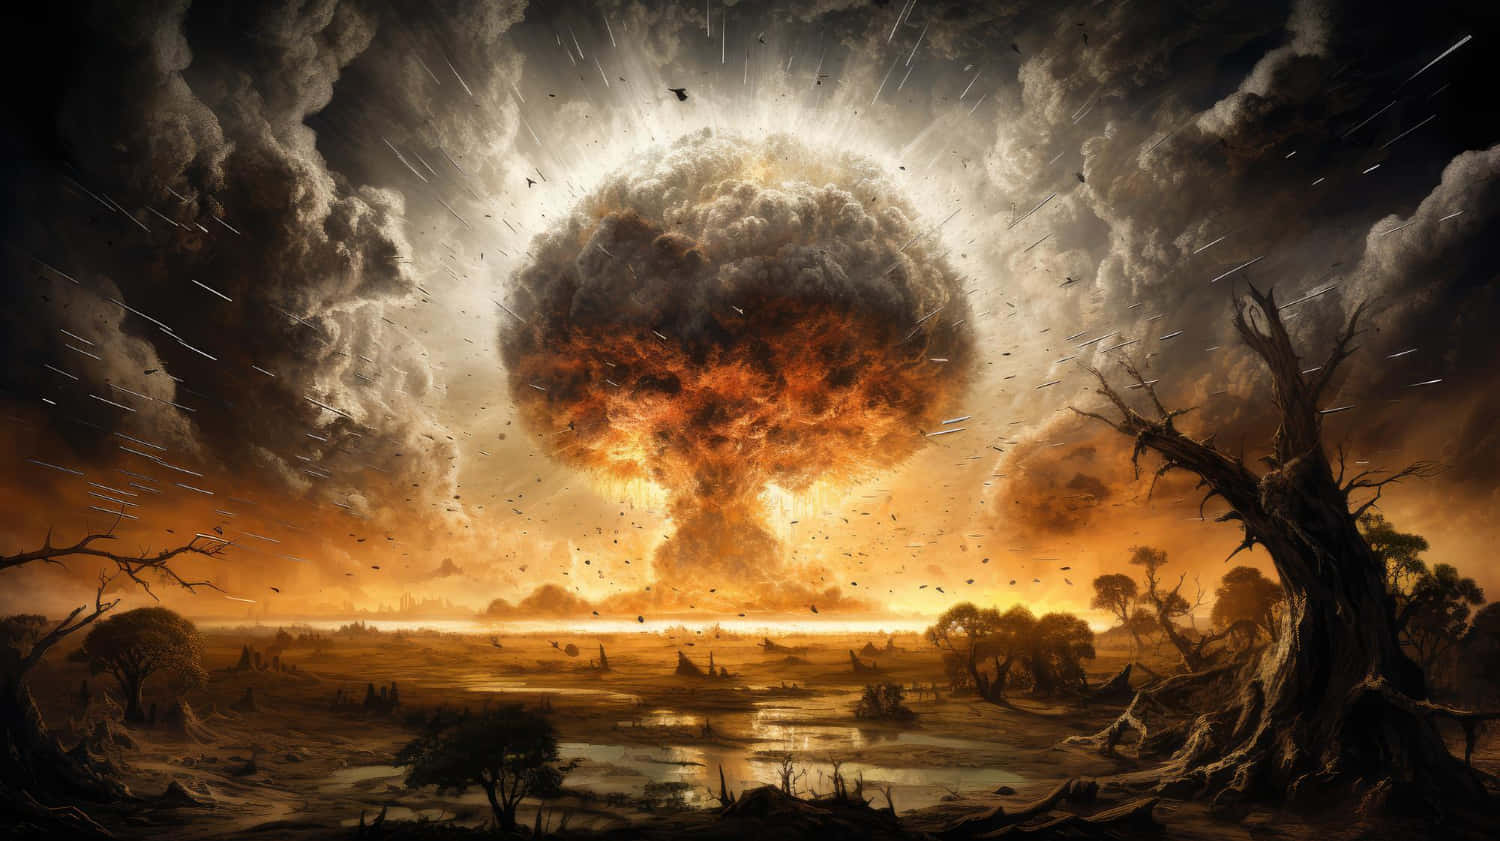 Apocalyptic Nuclear Explosion Artwork Background